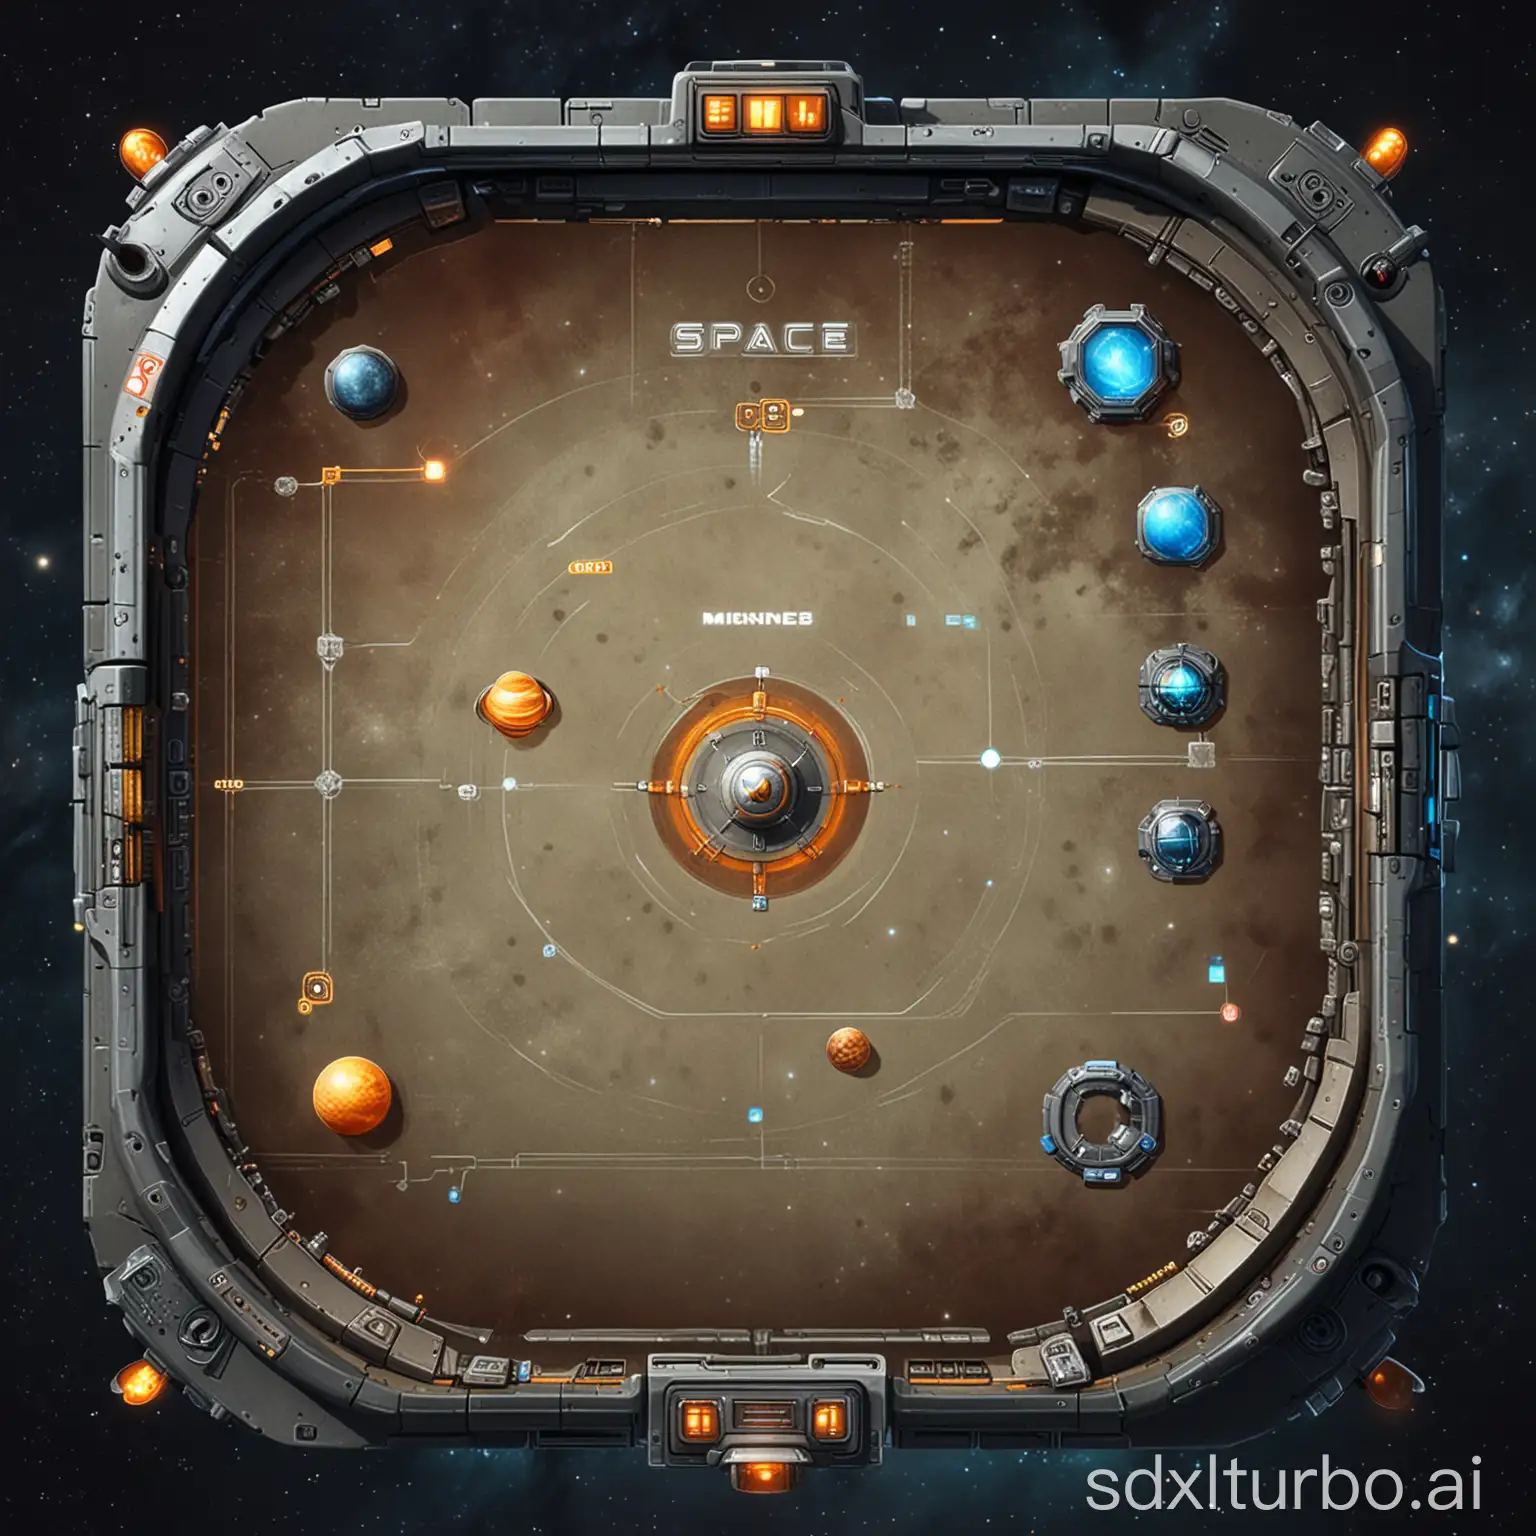  a mini map GUI element for a space game